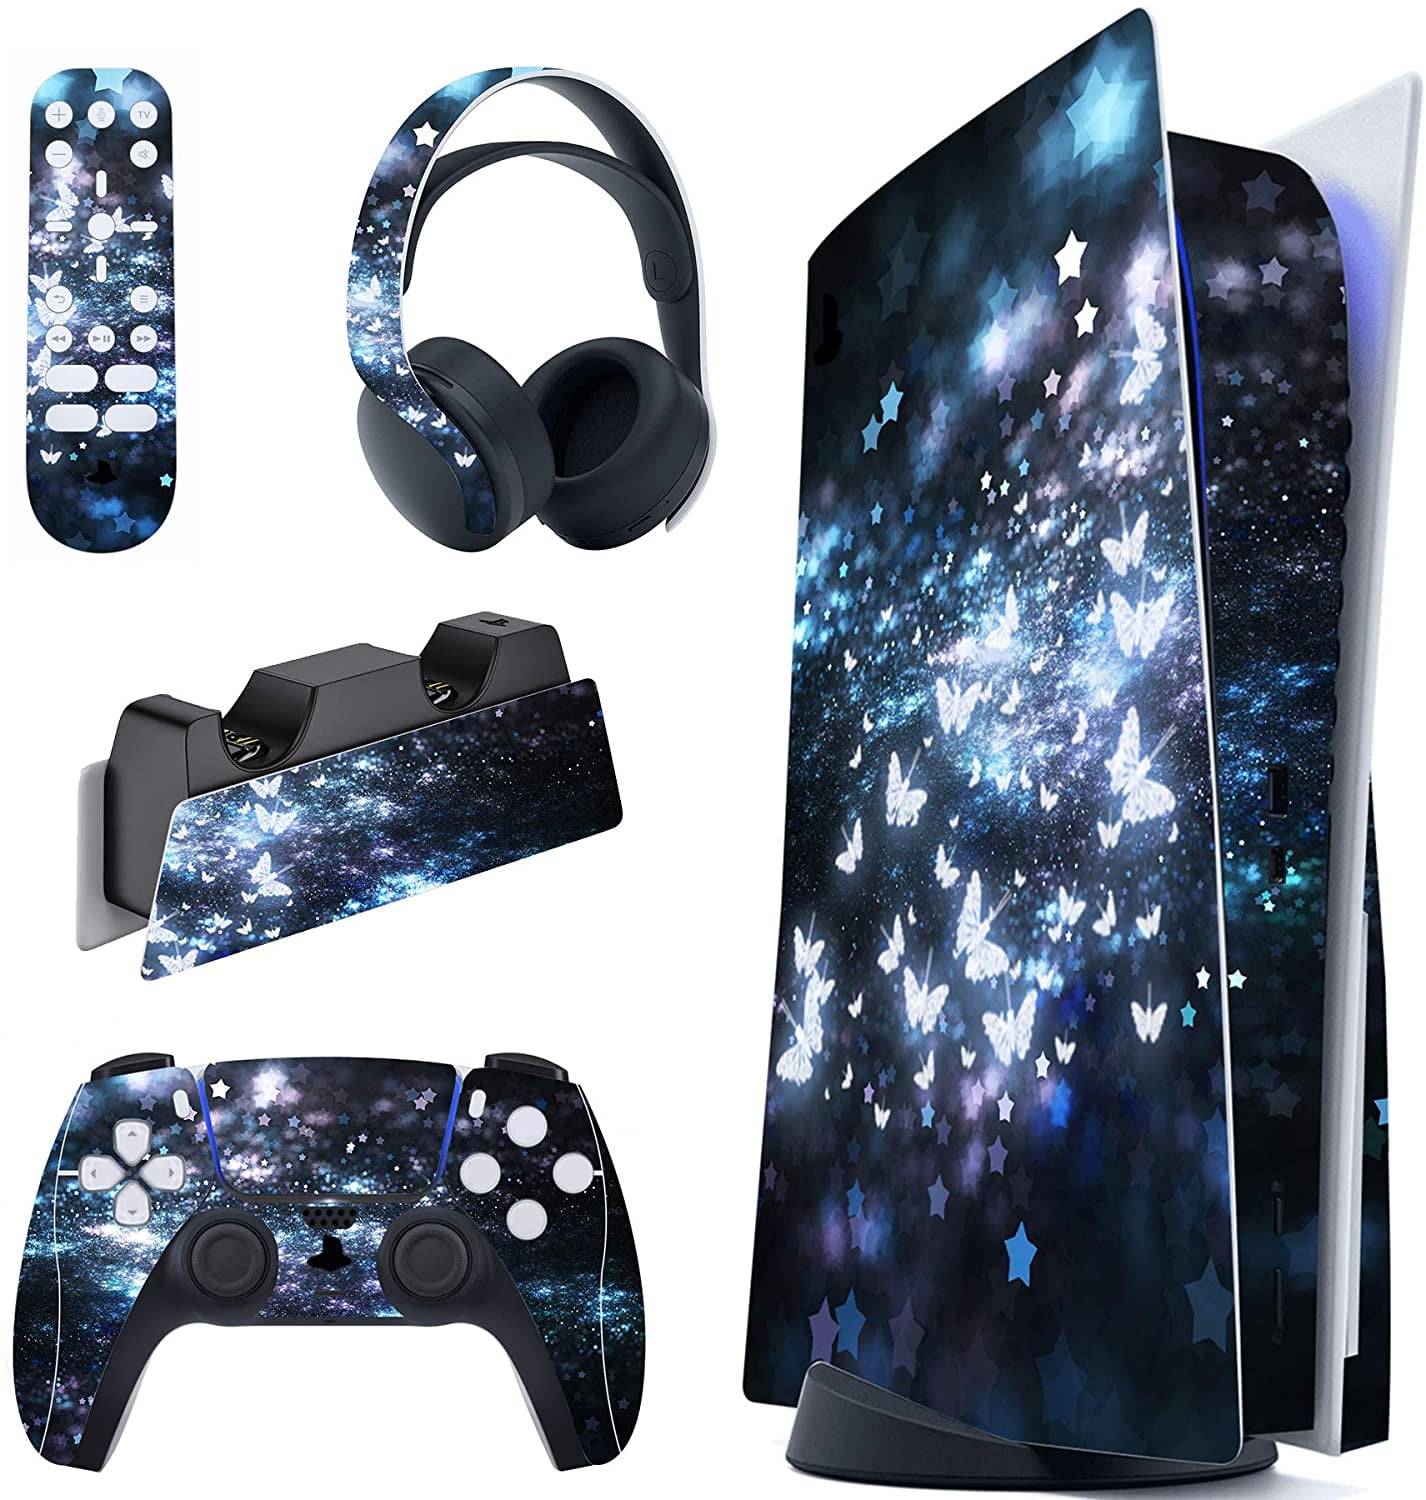  PlayVital Chrome Gold Glossy Full Set Skin Decal for ps5  Console Disc Edition, Sticker for ps5 Vinyl Decal Cover for ps5 Controller  & Charging Station & Headset & Media Remote 